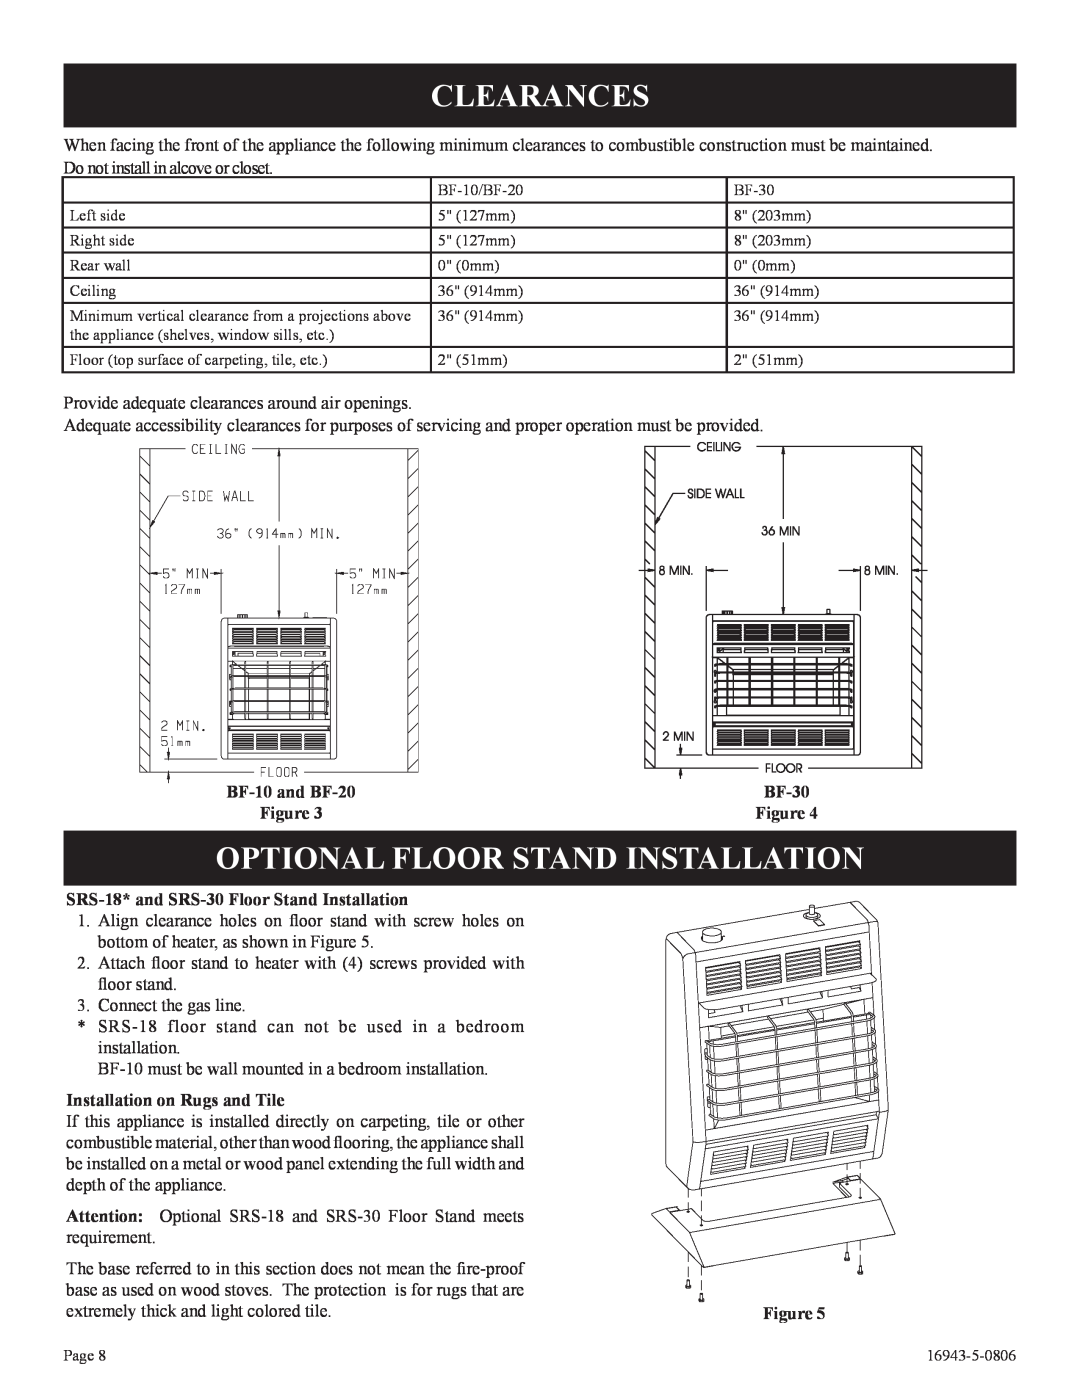 Empire Comfort Systems BF-10-2, BF-30-2, BF-20-2 Clearances, Optional Floor Stand Installation, BF-10and BF-20 